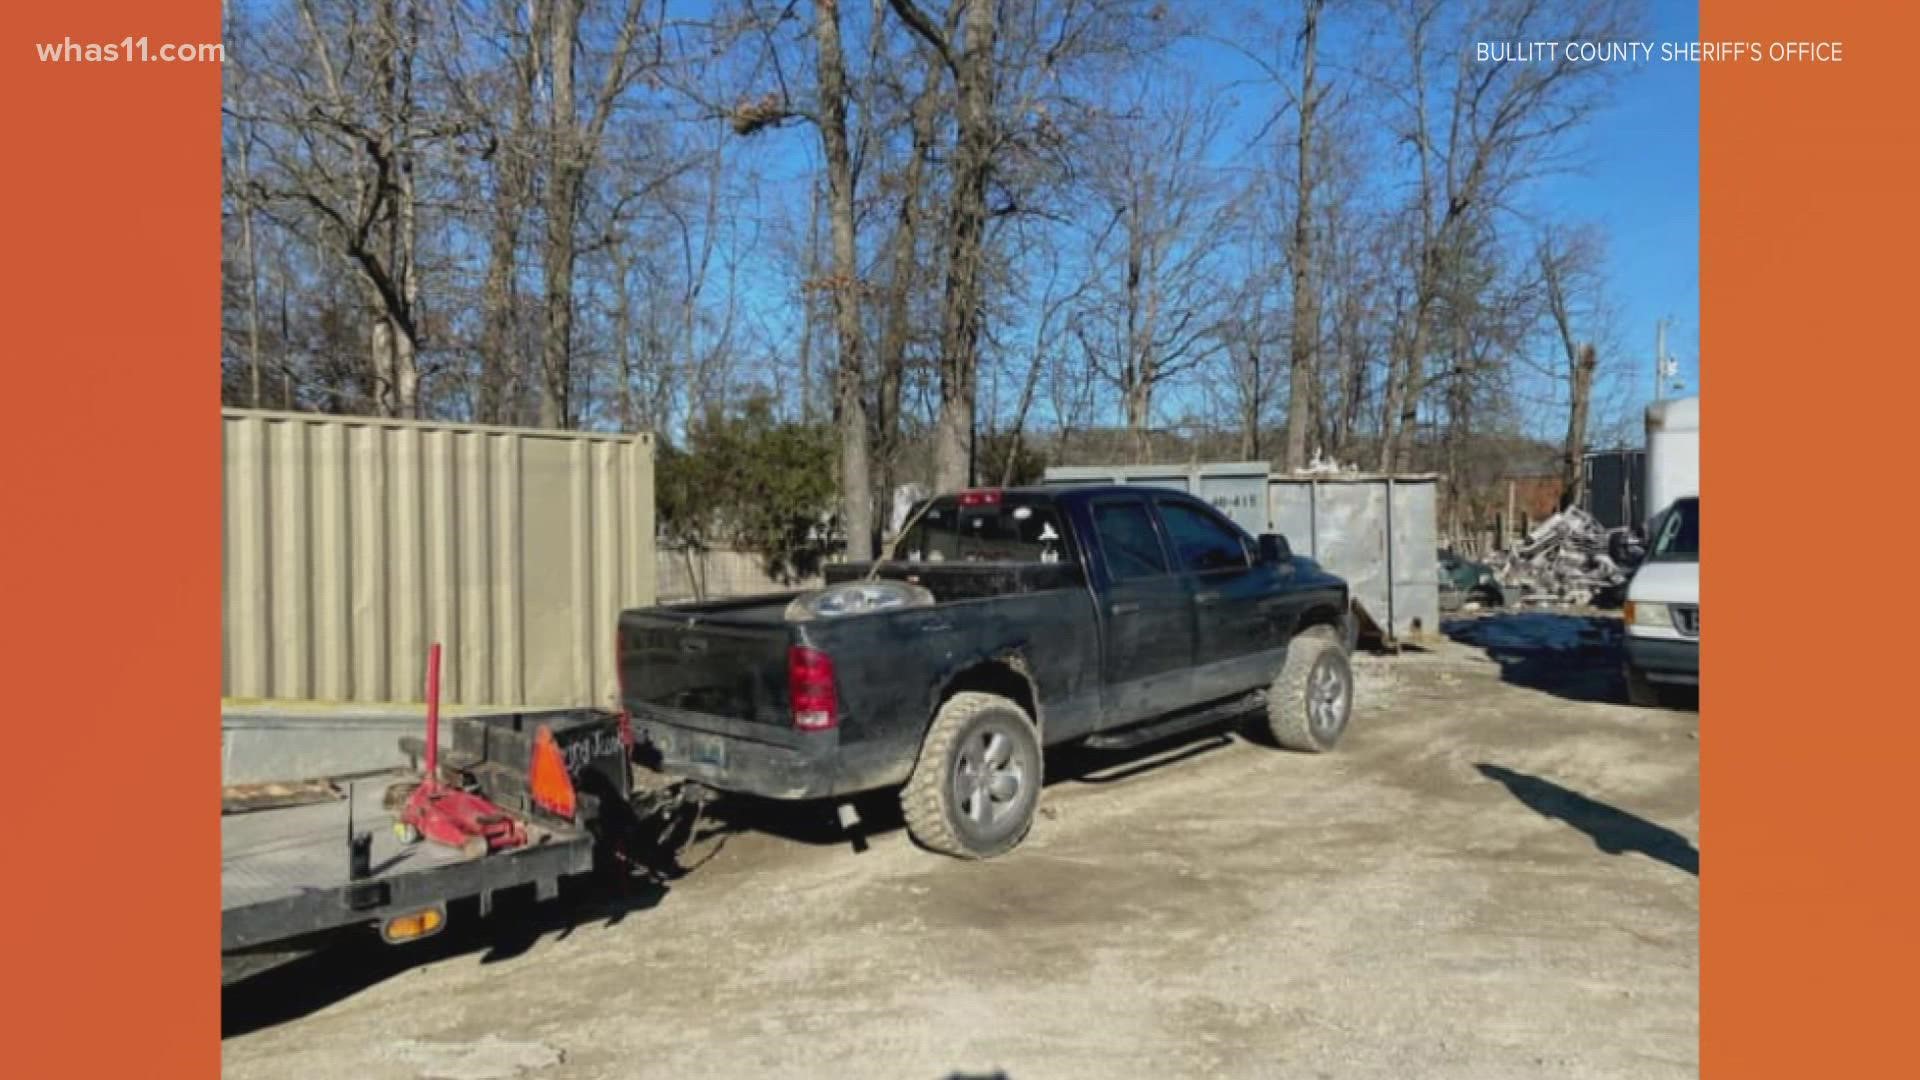 The Bullitt County Sheriff's Office alleged Dwight Lee sold 56 abandoned vehicles to a local salvage yard between June 1, 2019 through Jan. 4, 2022.